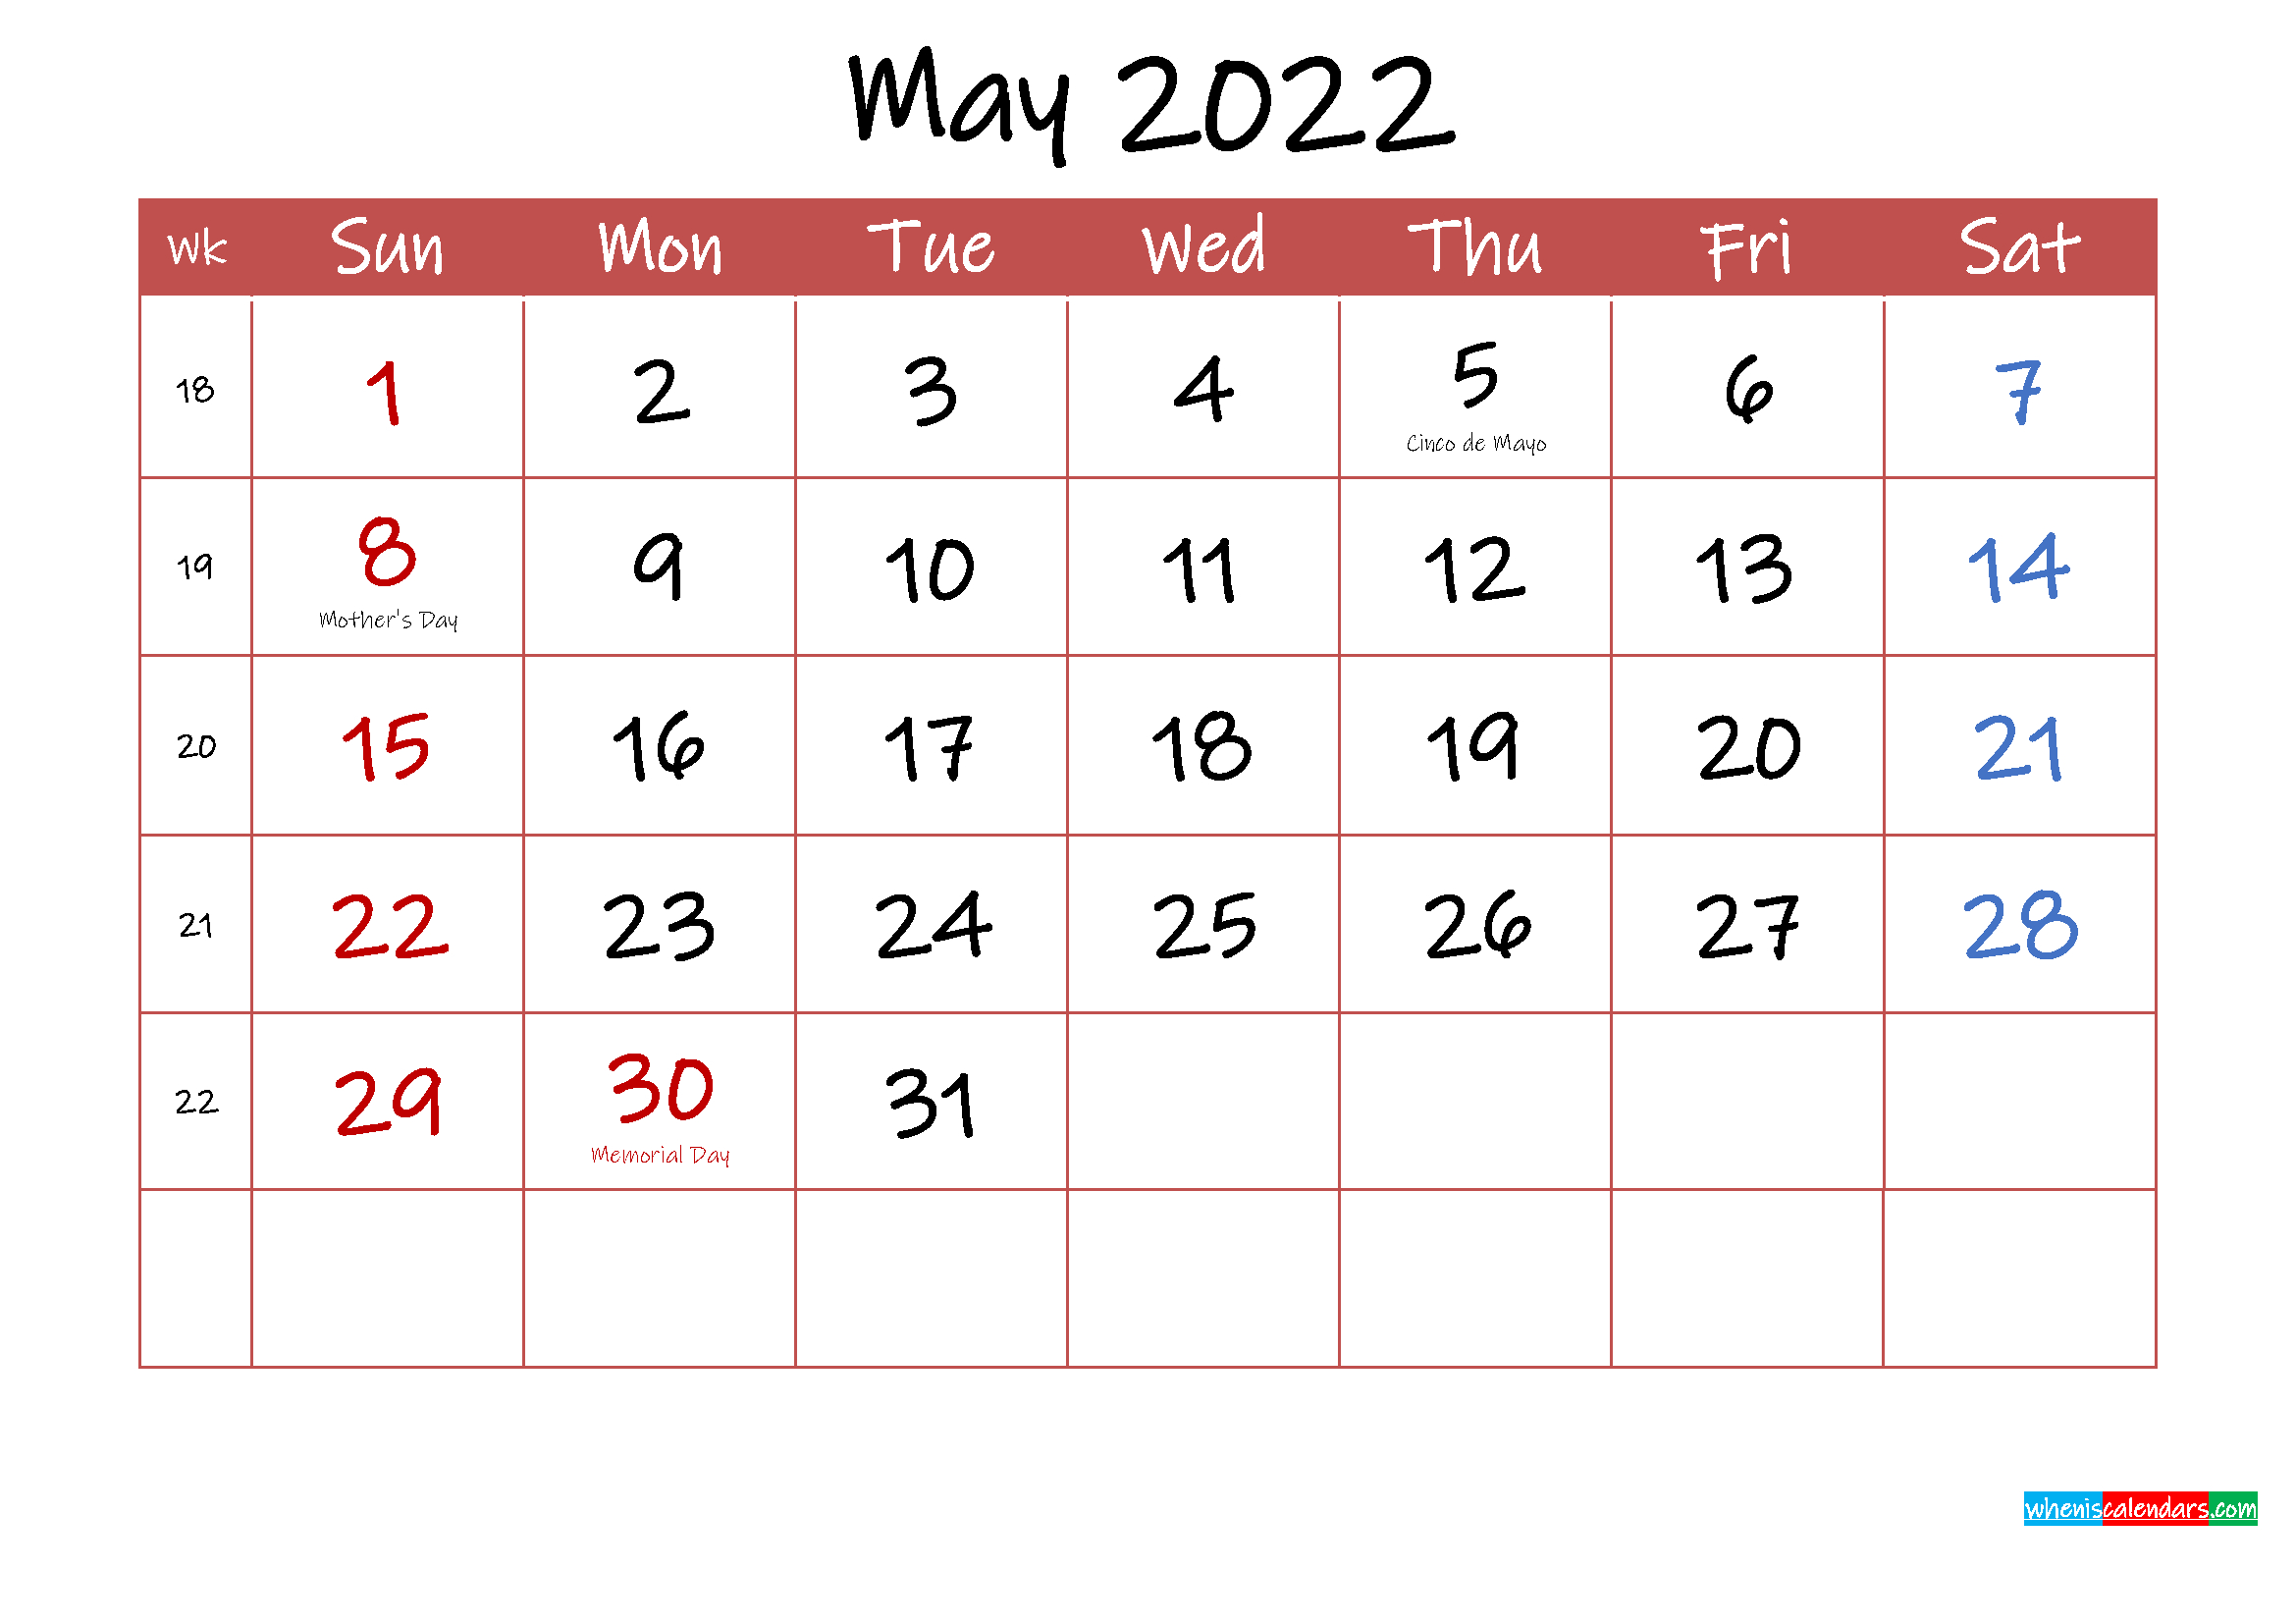 Printable May 2022 Calendar With Holidays - Template Ink22M29